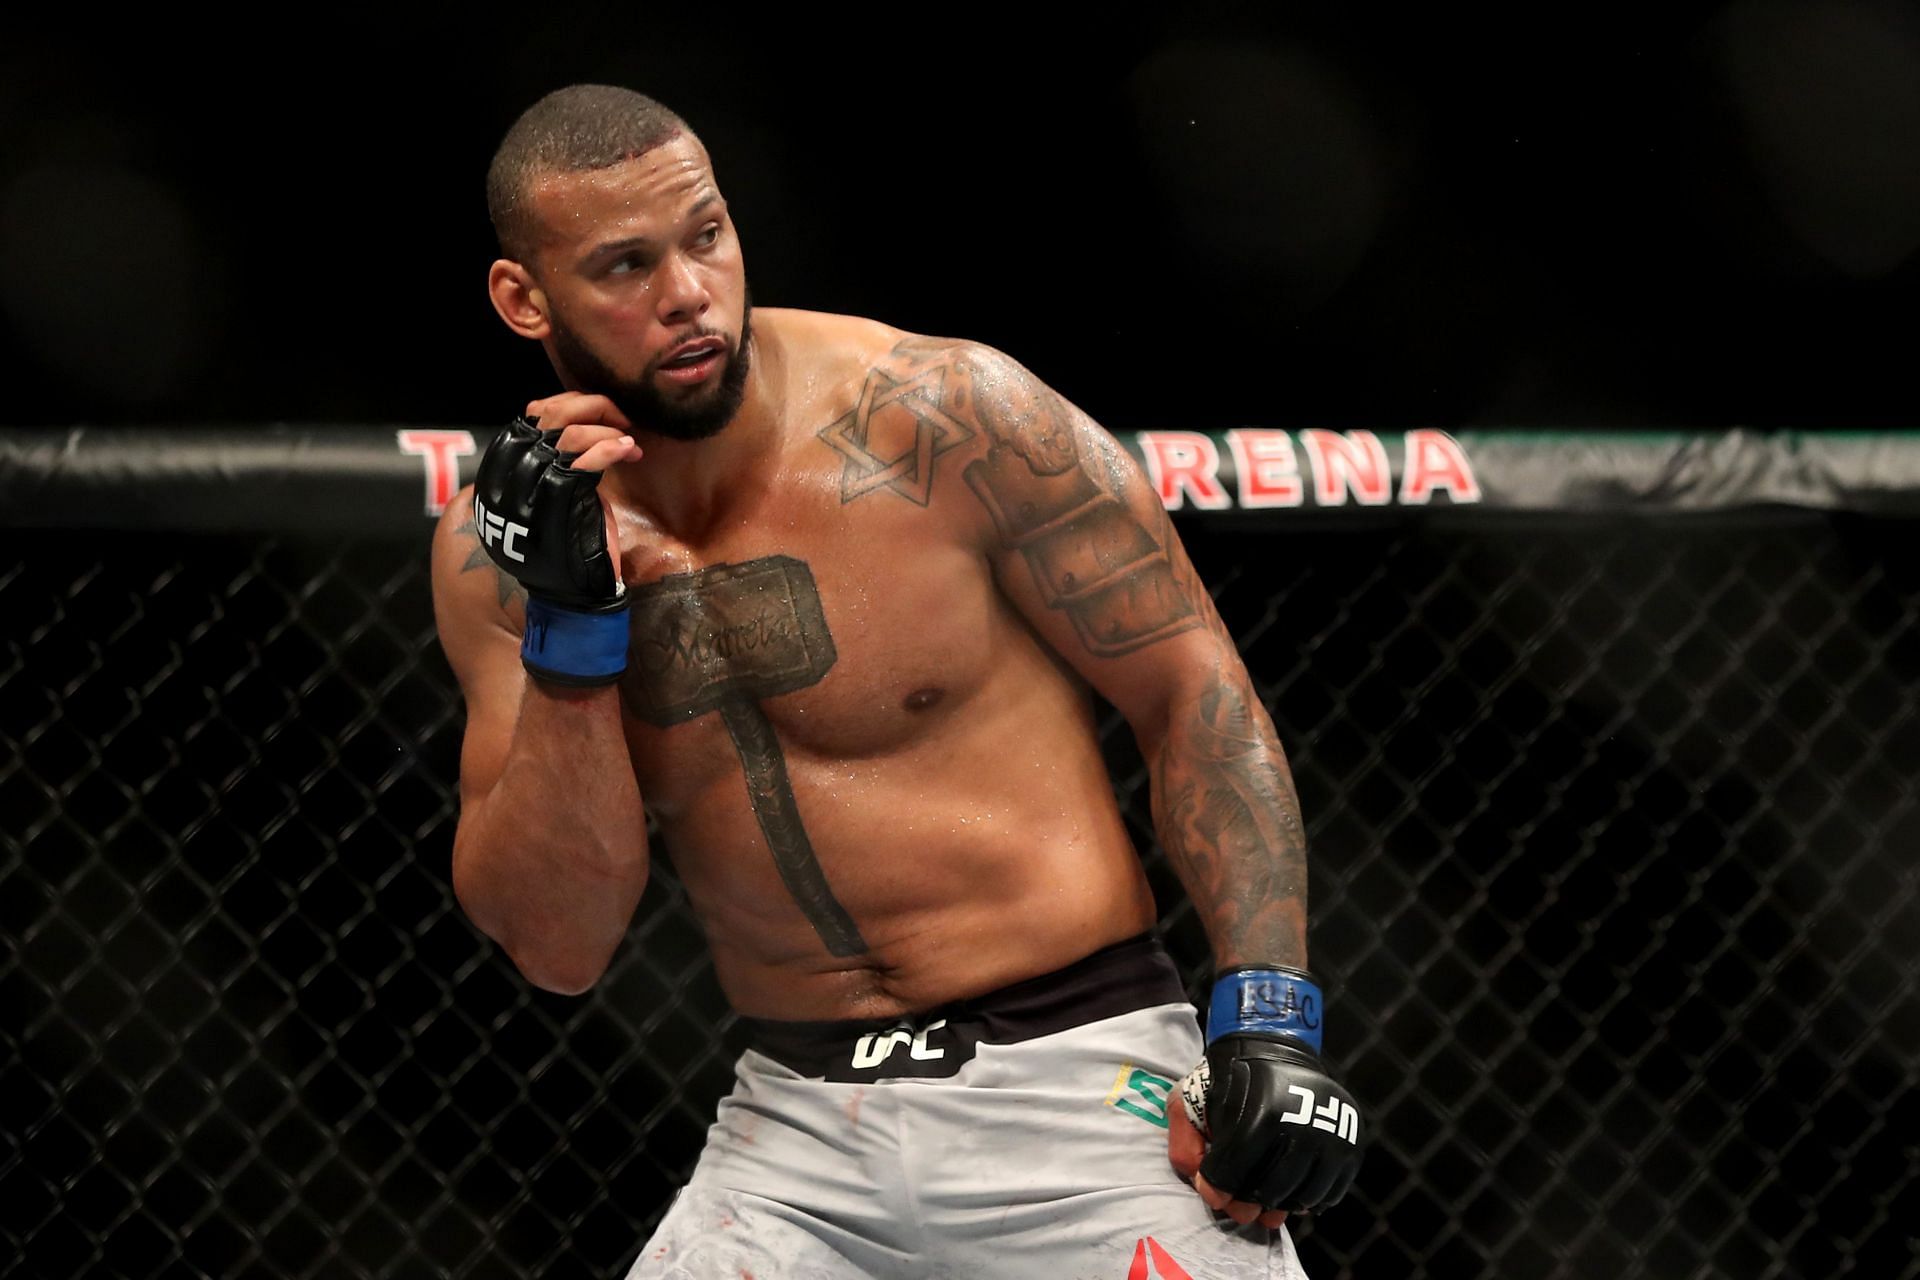 Thiago Santos scored some brutal knockouts during his octagon career